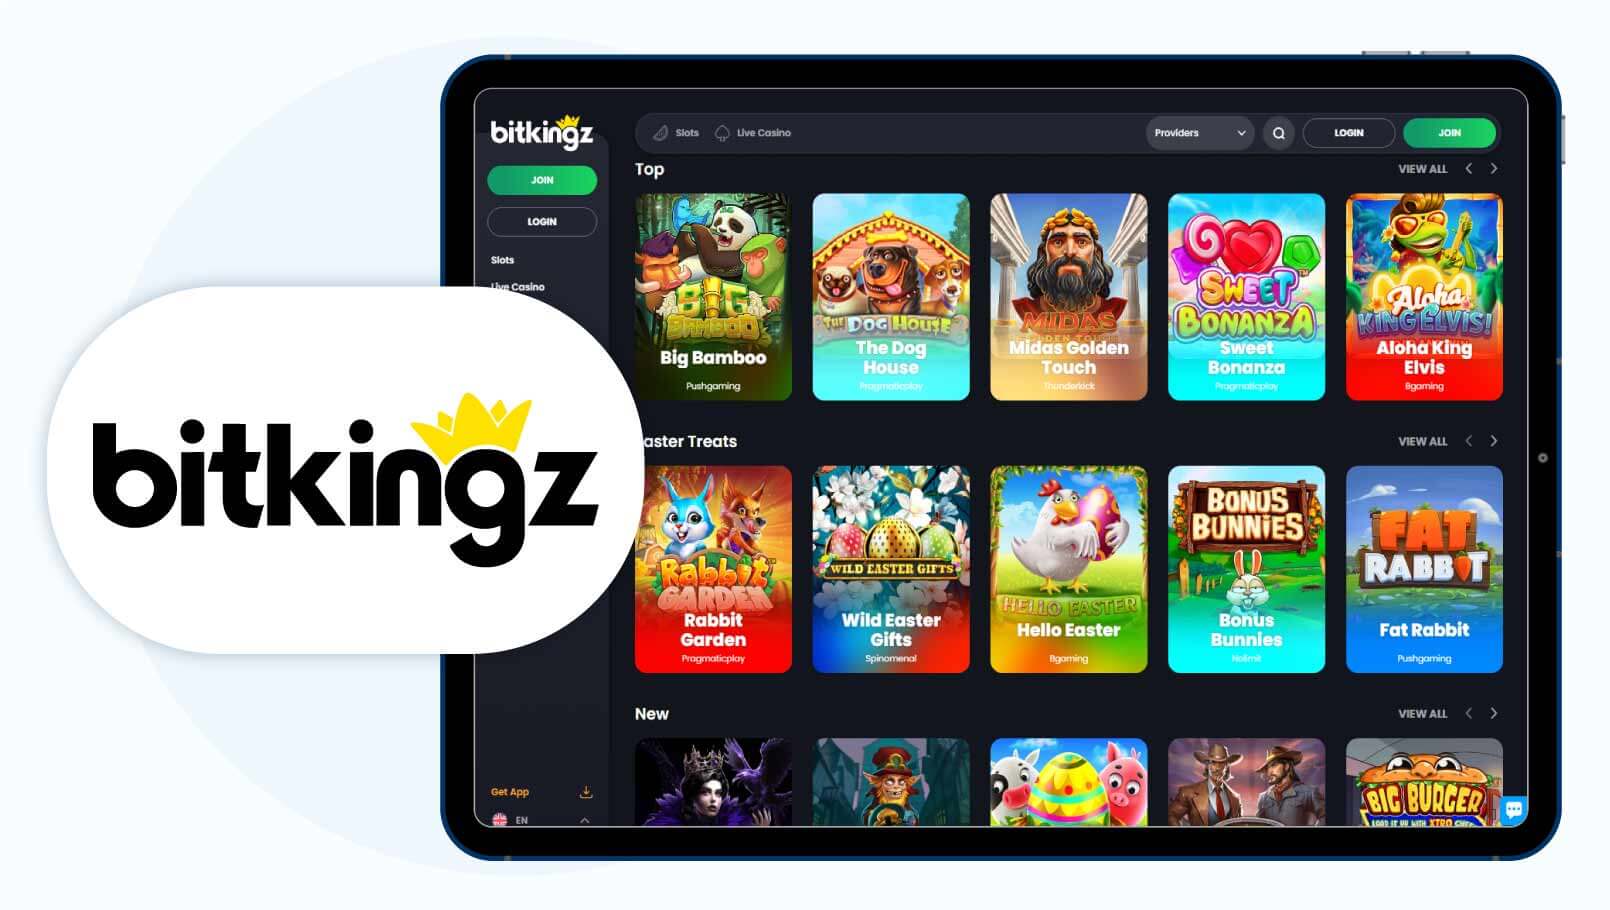 bitKingz-Casino-25-Free-Spins-to-Play-Aloha-King-Elvis